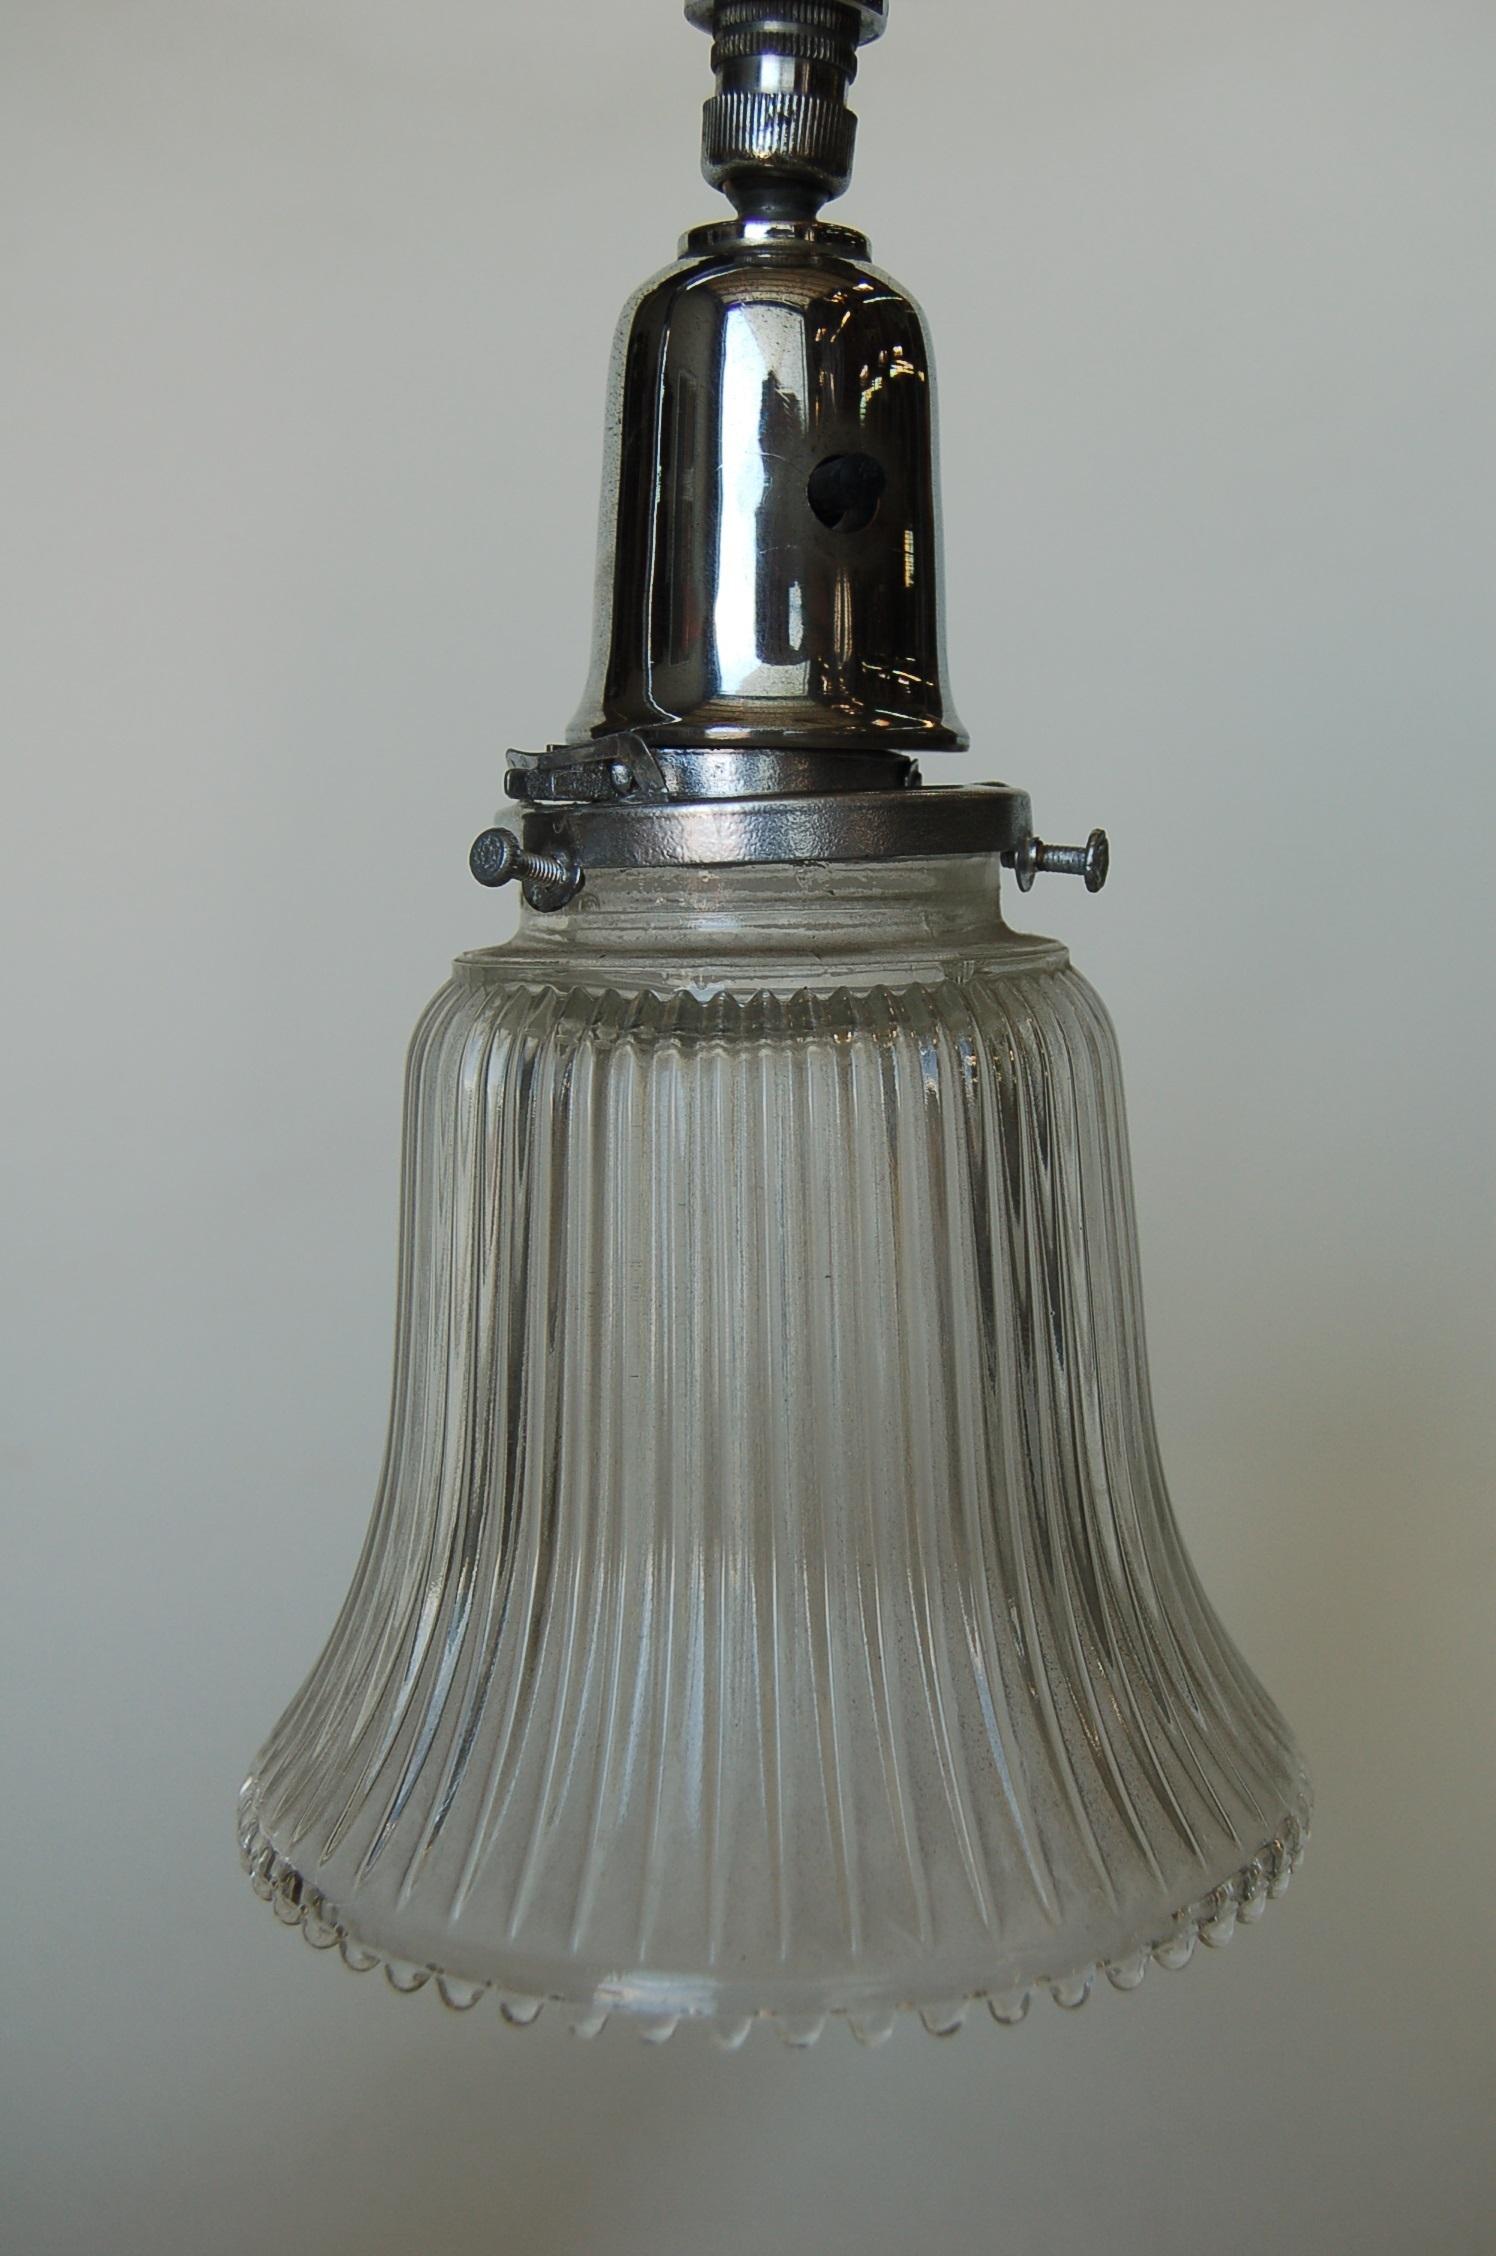 Art Deco Desk Table Lamp with Bell Shaped Glass Shade In Excellent Condition For Sale In Van Nuys, CA